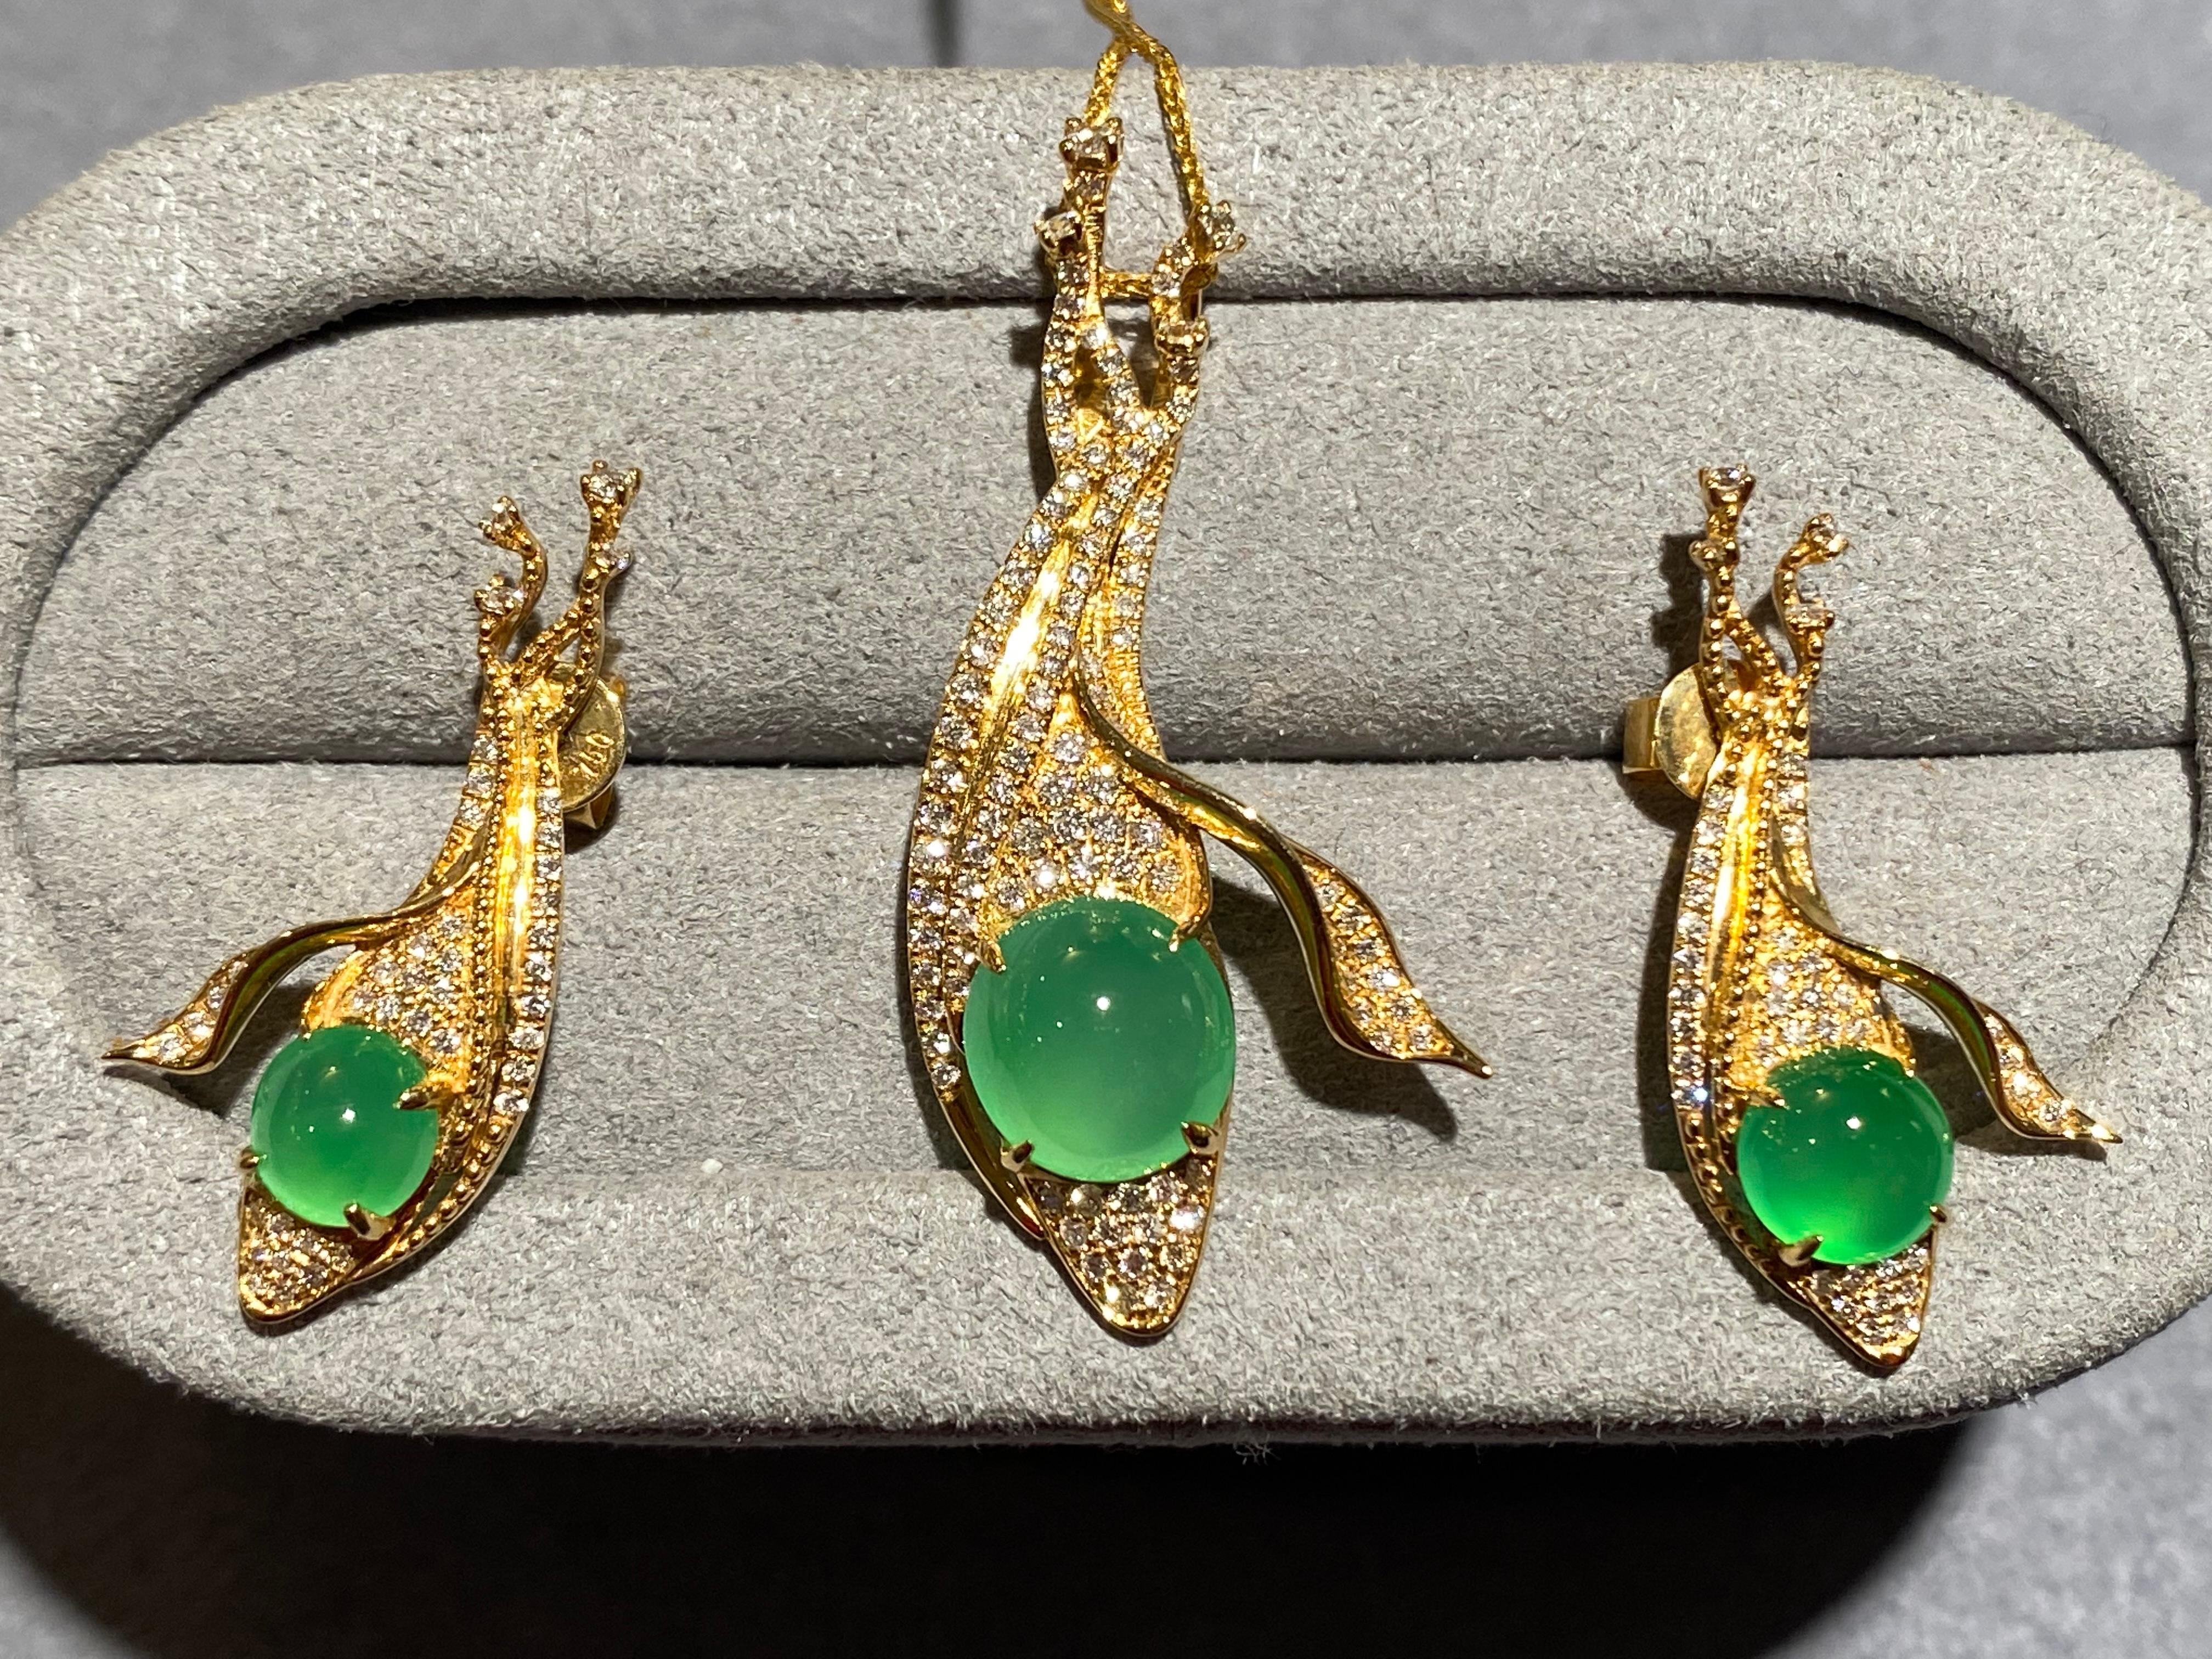 This jewellery set consists of a pair of type A green jadeite and diamond earrings with a matching type A green jadeite and diamond pendant in 18k yellow gold. The jadeite is set on top of multiple layer of ribbon stacking together with diamond pave